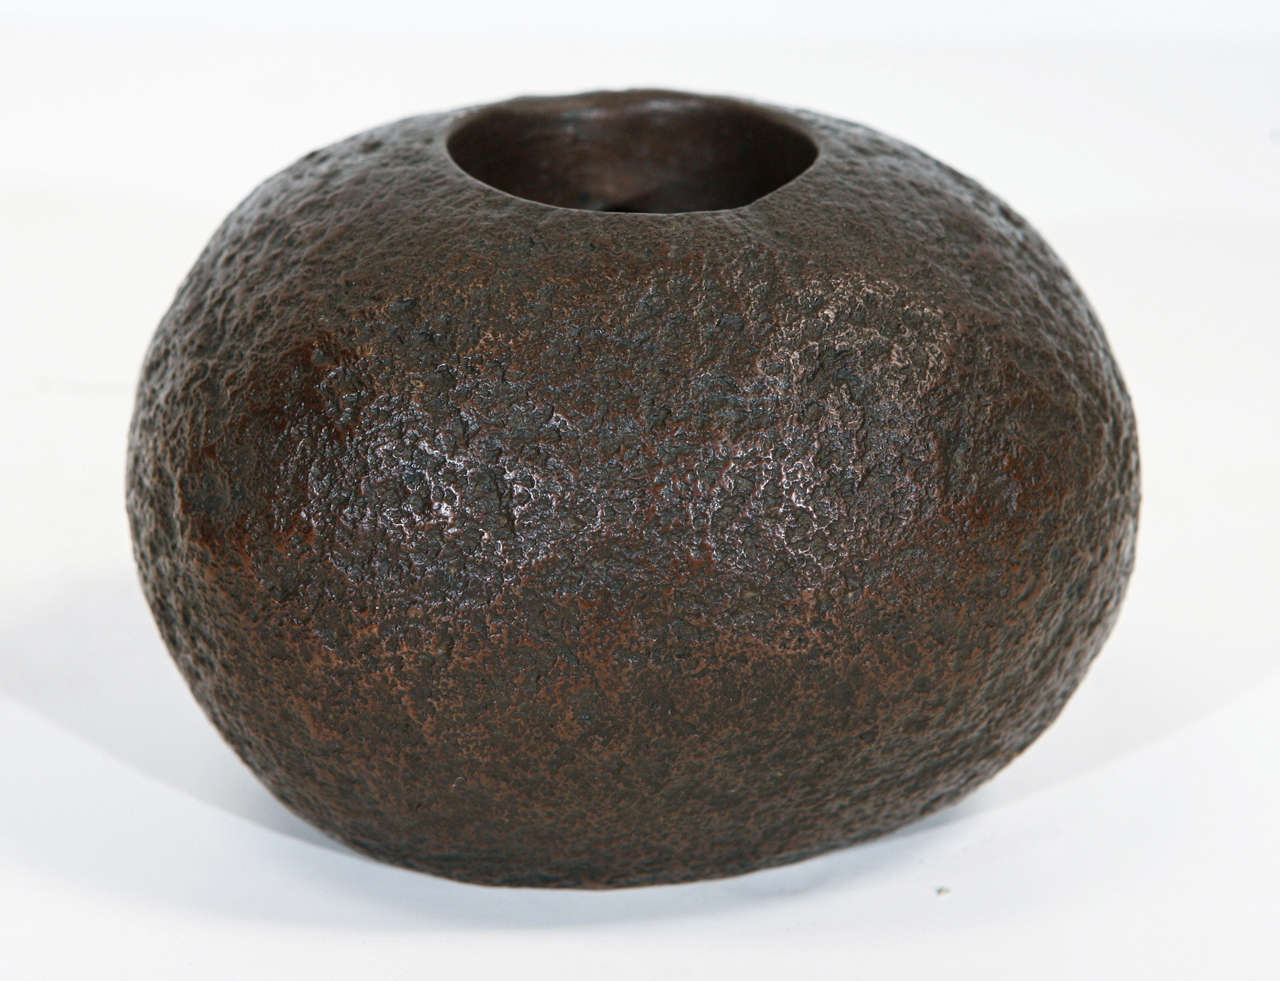 New cast oval bronze rock, functions as a small planter or vase on one end or as a candleholder on the other end, American.
7-8 week lead time for production if not in stock.